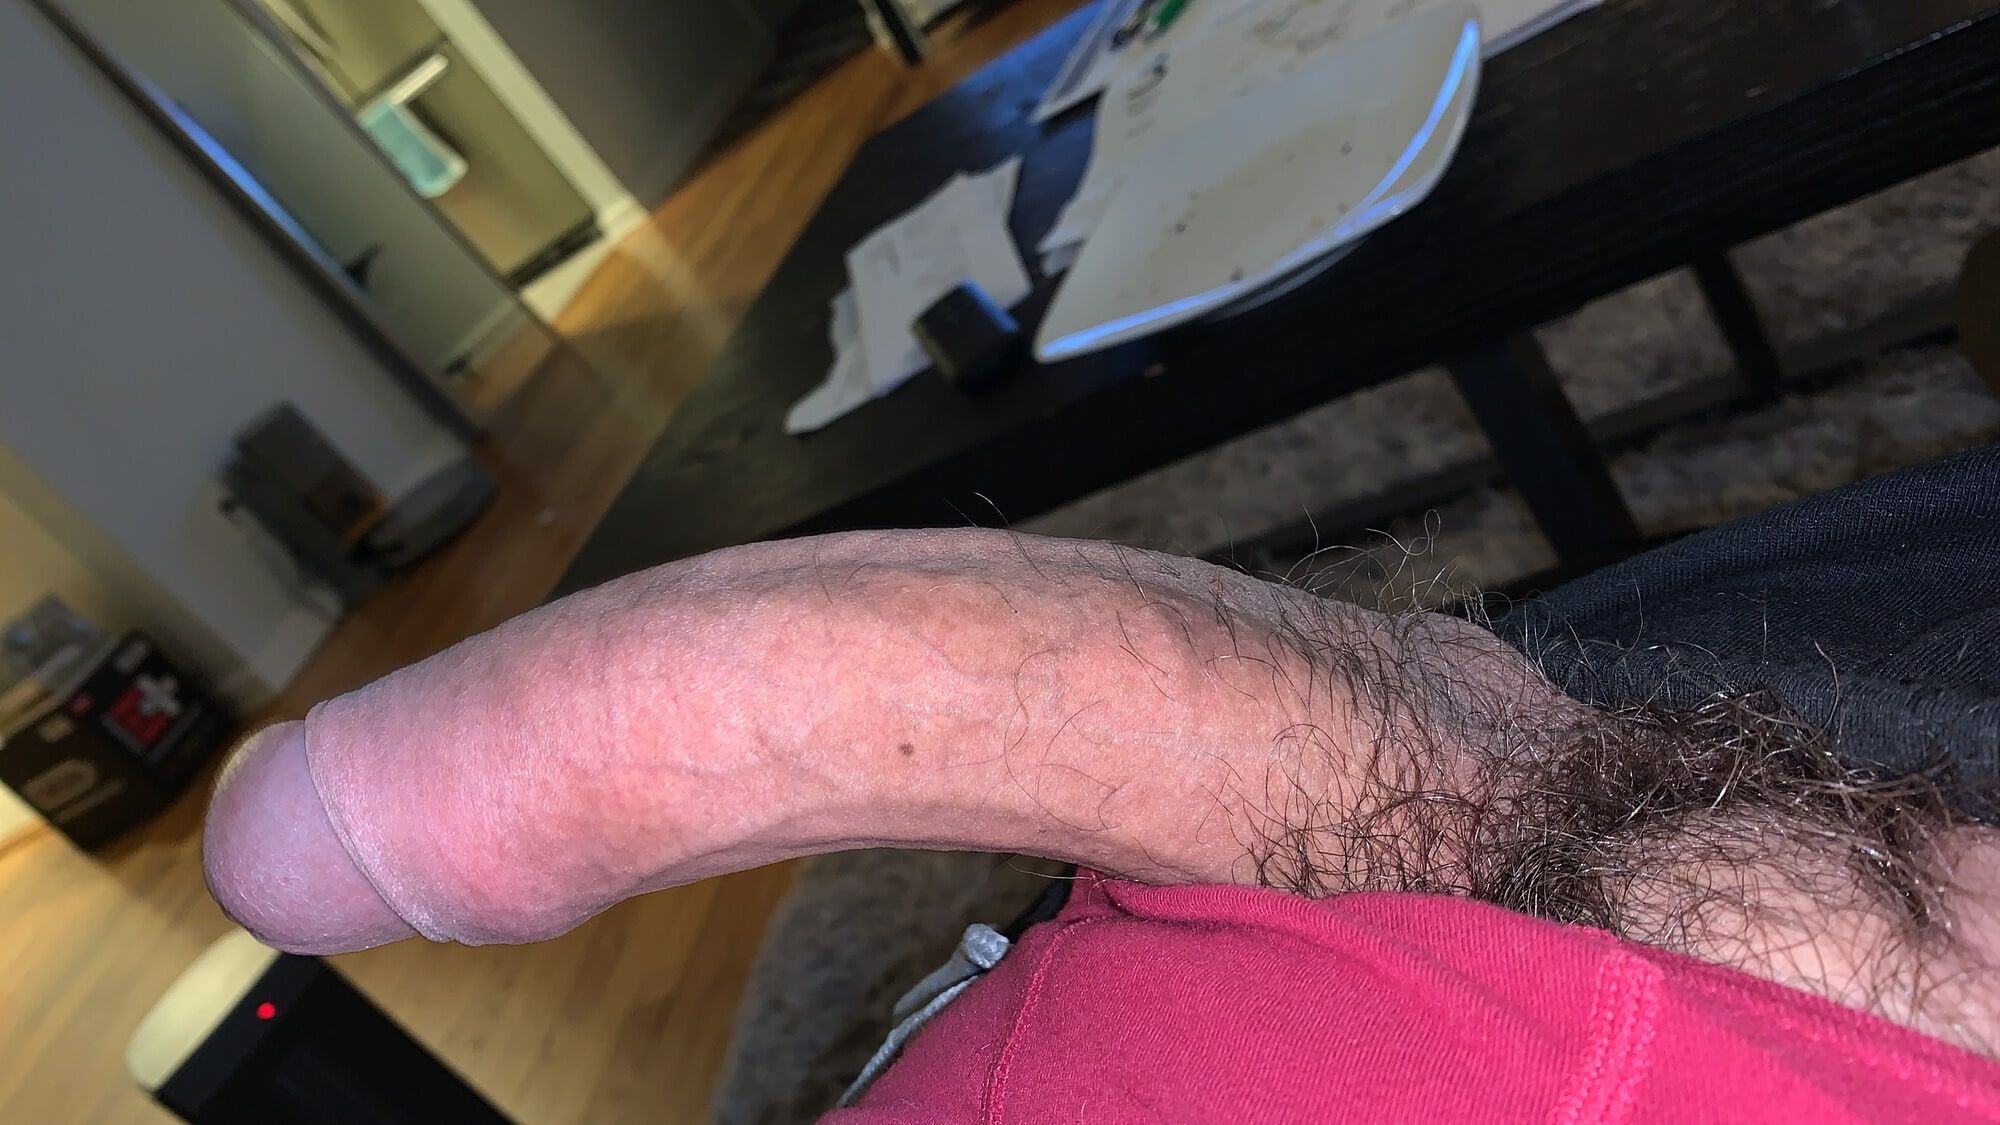 Large white cock #3